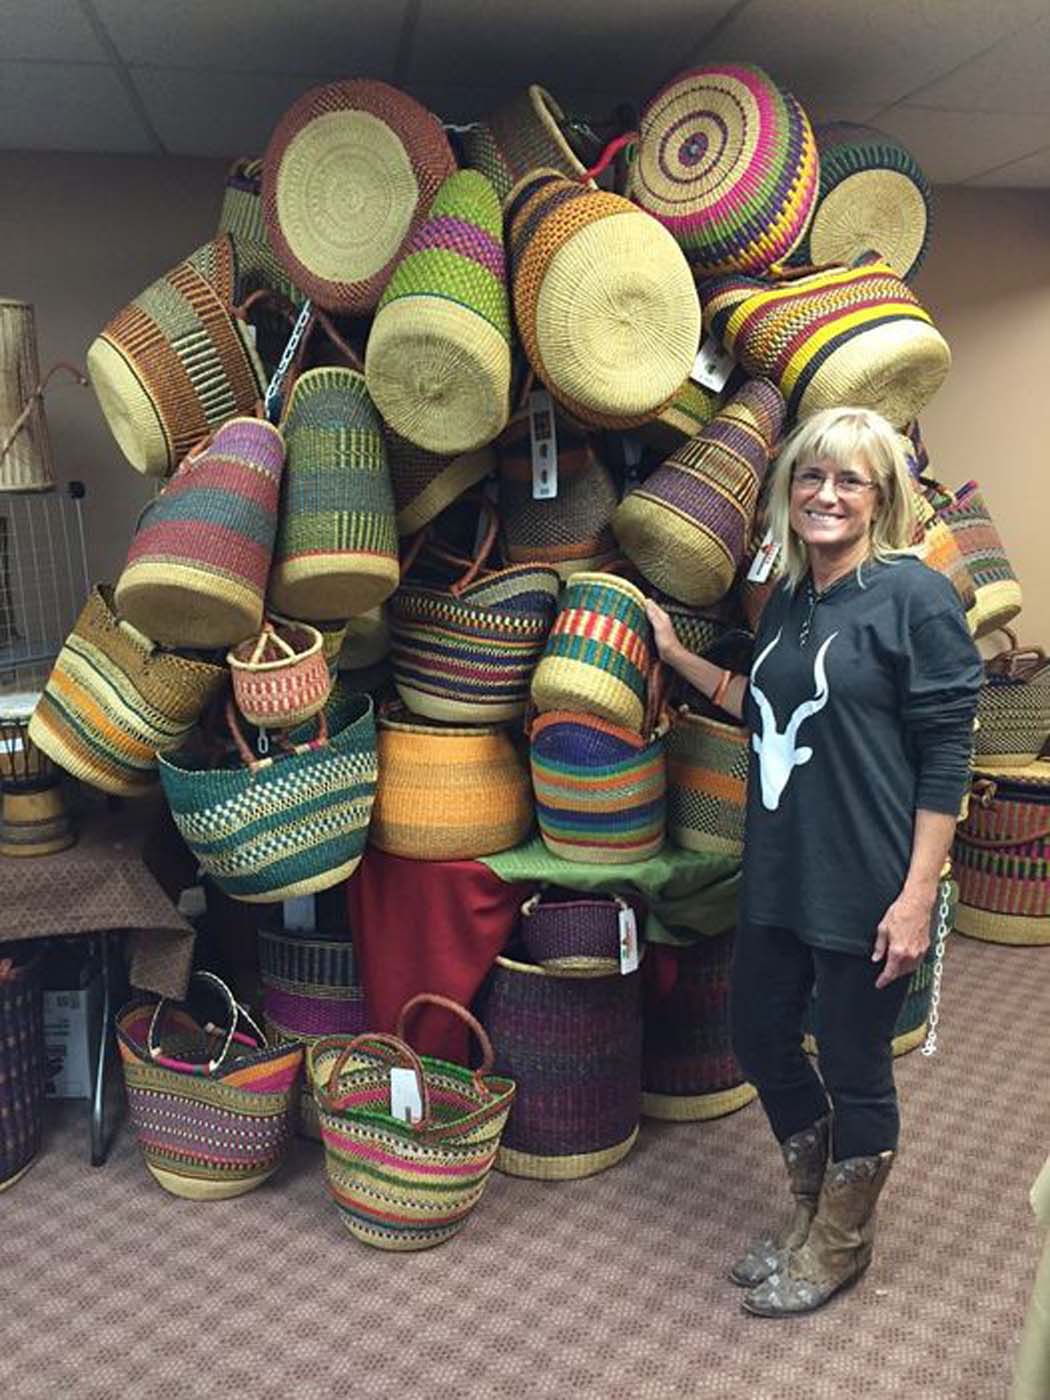 A truly impressive display of baskets of all sizes and styles